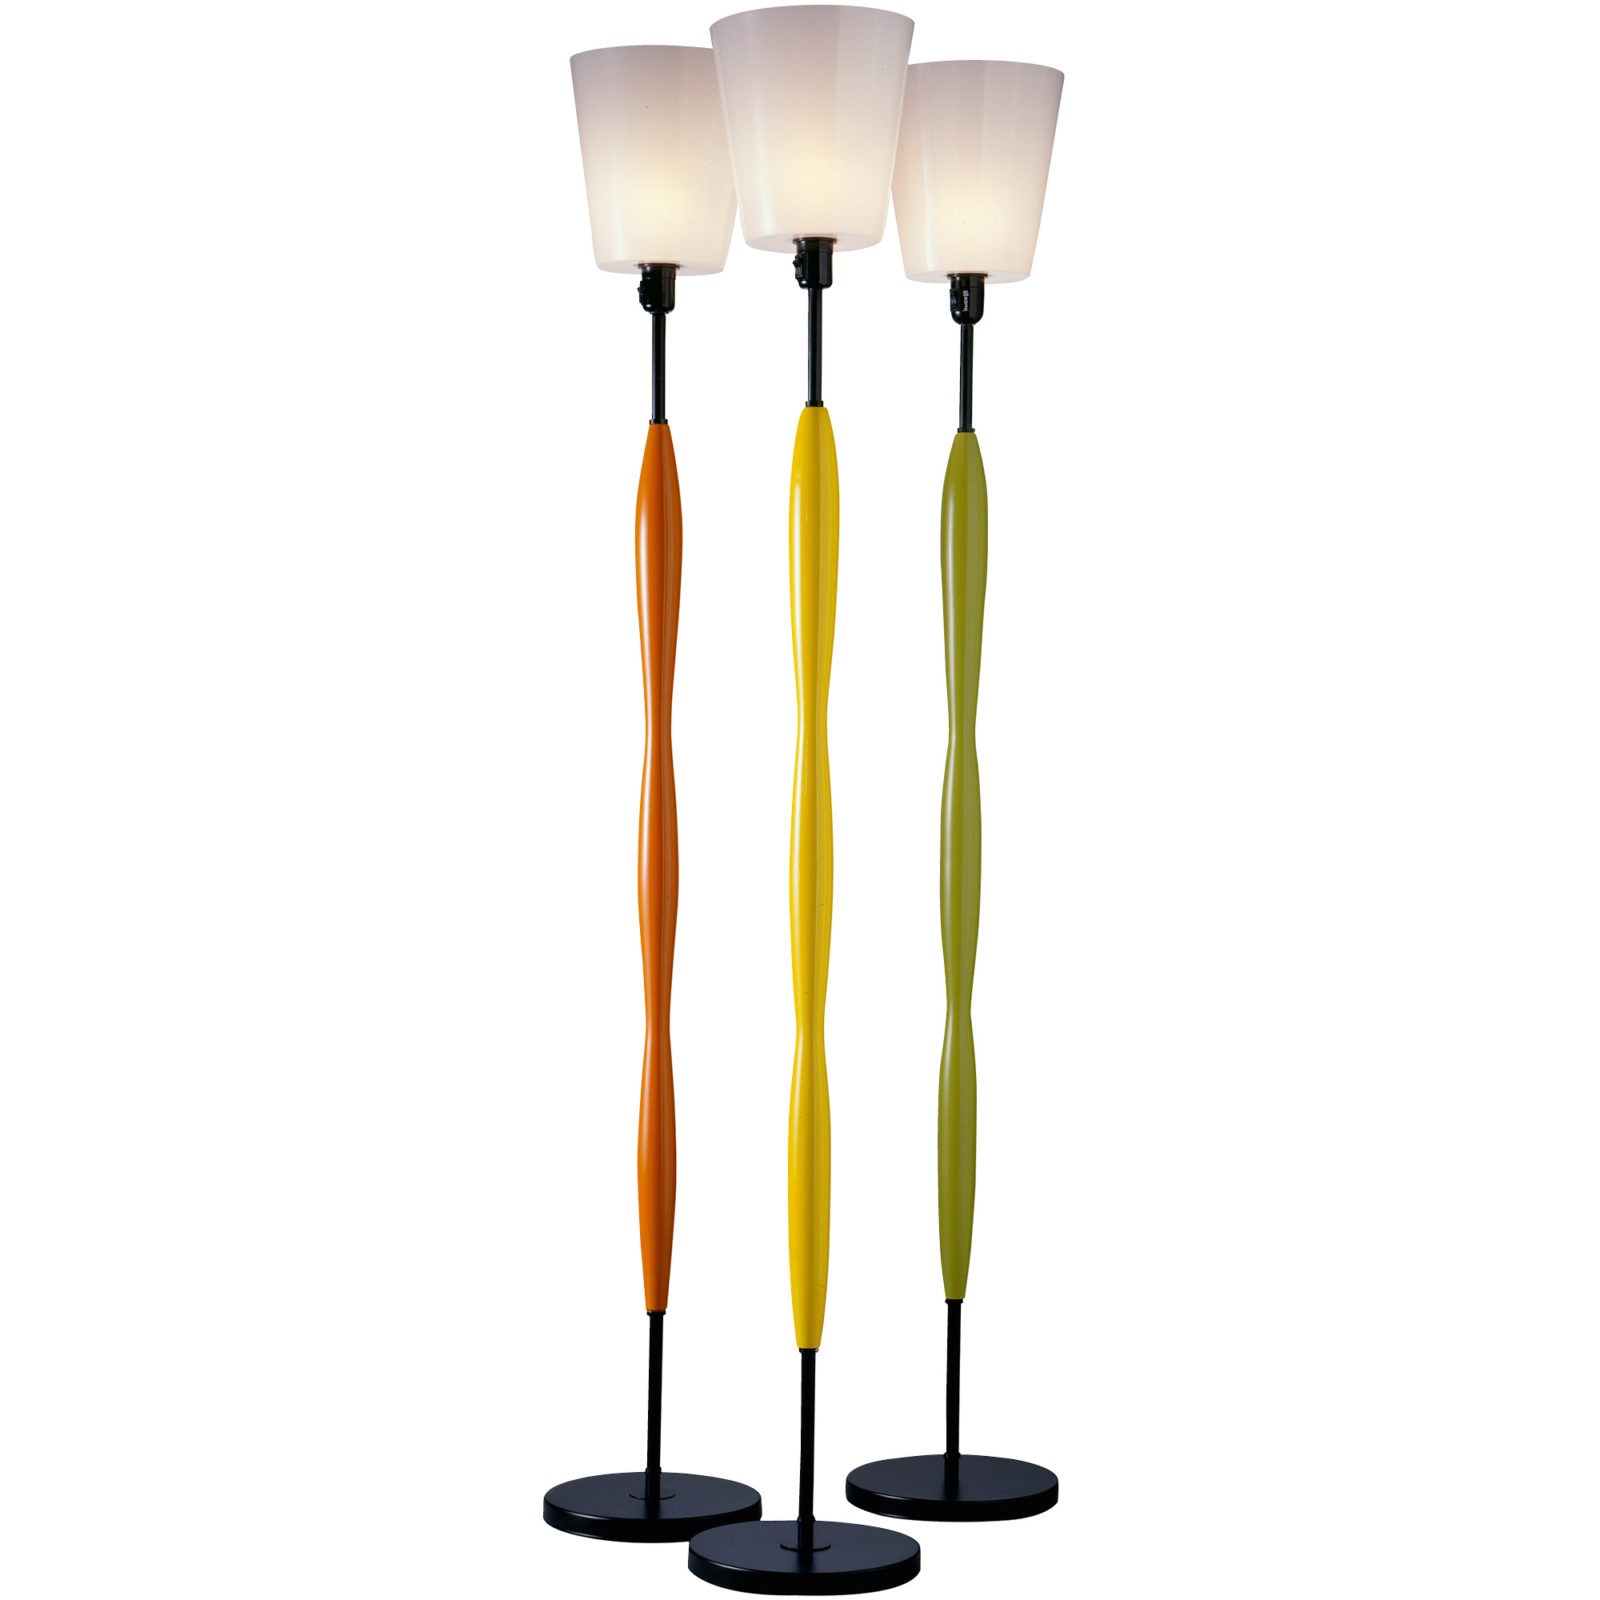 There are floor lamps with frosted glass shades, base in orange, yellow or green, with black foot, SMOG.